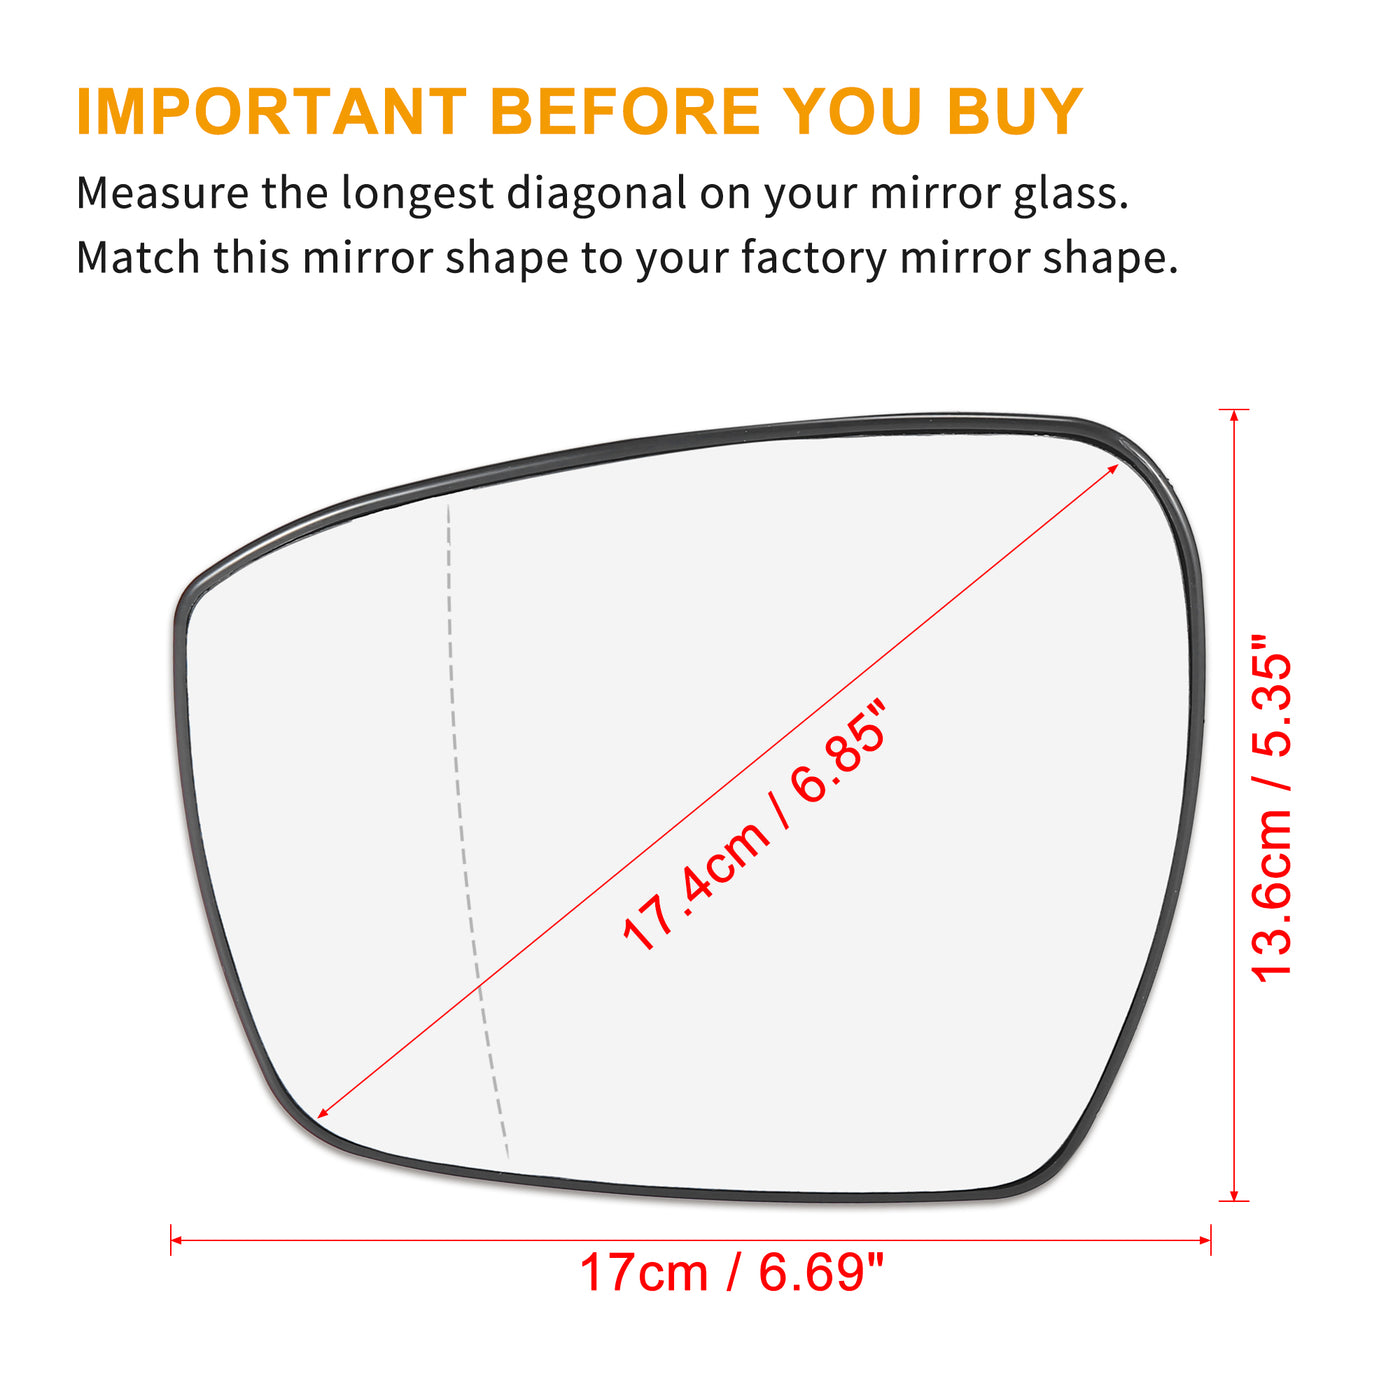 X AUTOHAUX Car Rearview Mirror Glass Replacement with Backing Plate Heated Left Side Driver Side for Ford Edge 2015 2016 2017 2018